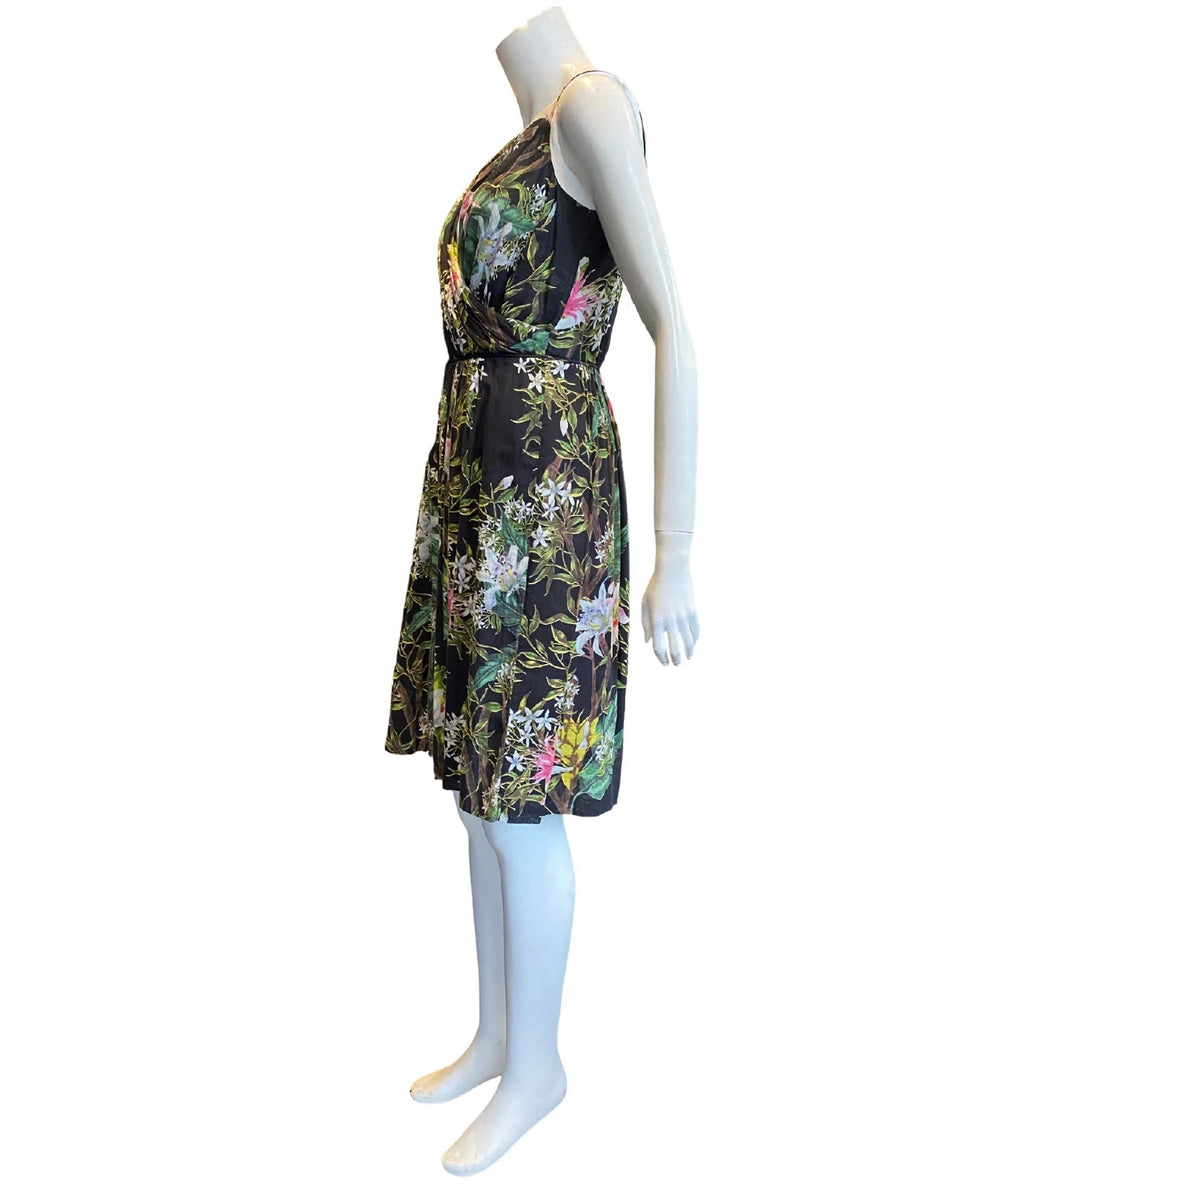 Pre-Owned ISABEL MARANT Floral Dress | Small - theREMODA